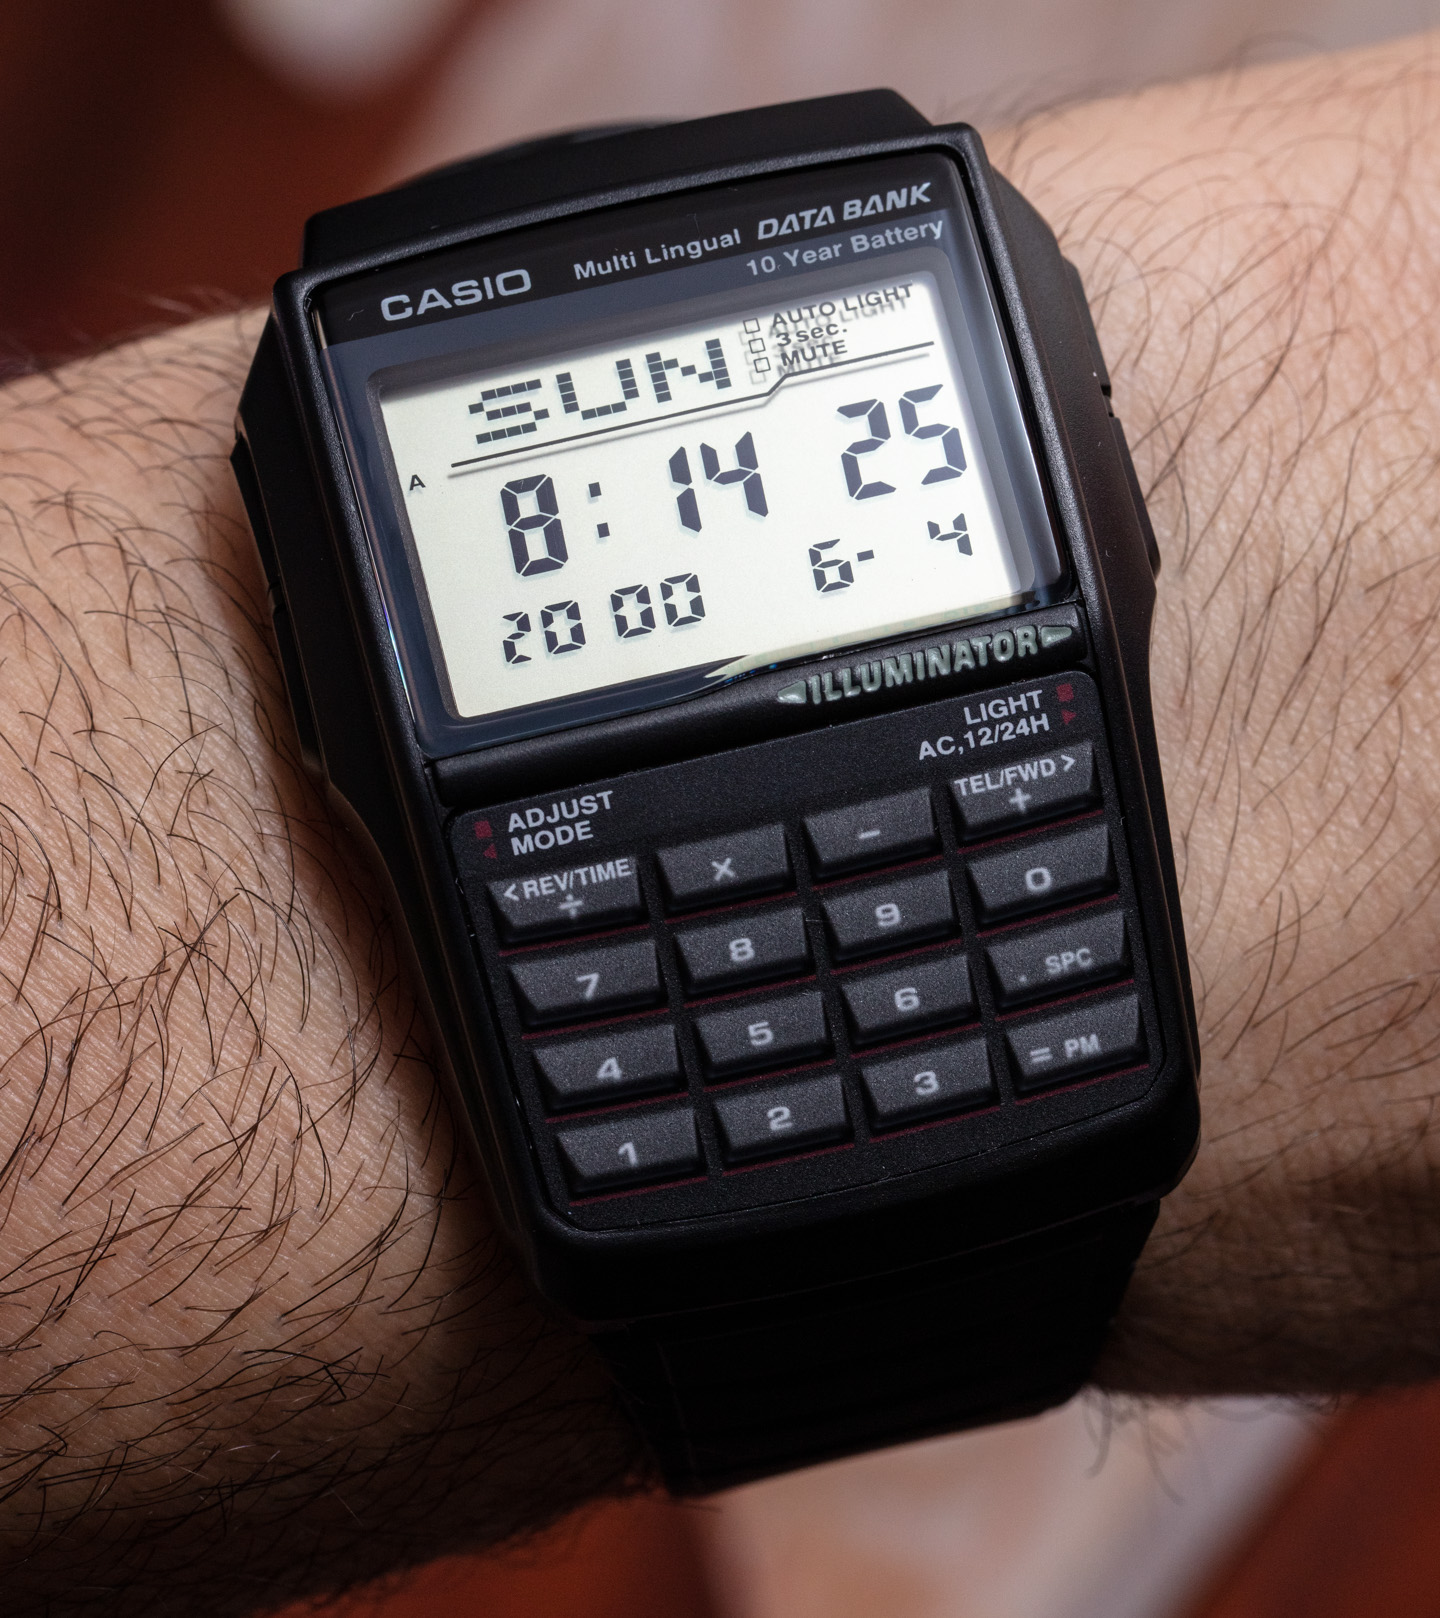 Casio C-80 Calculator Watch from the 1980s